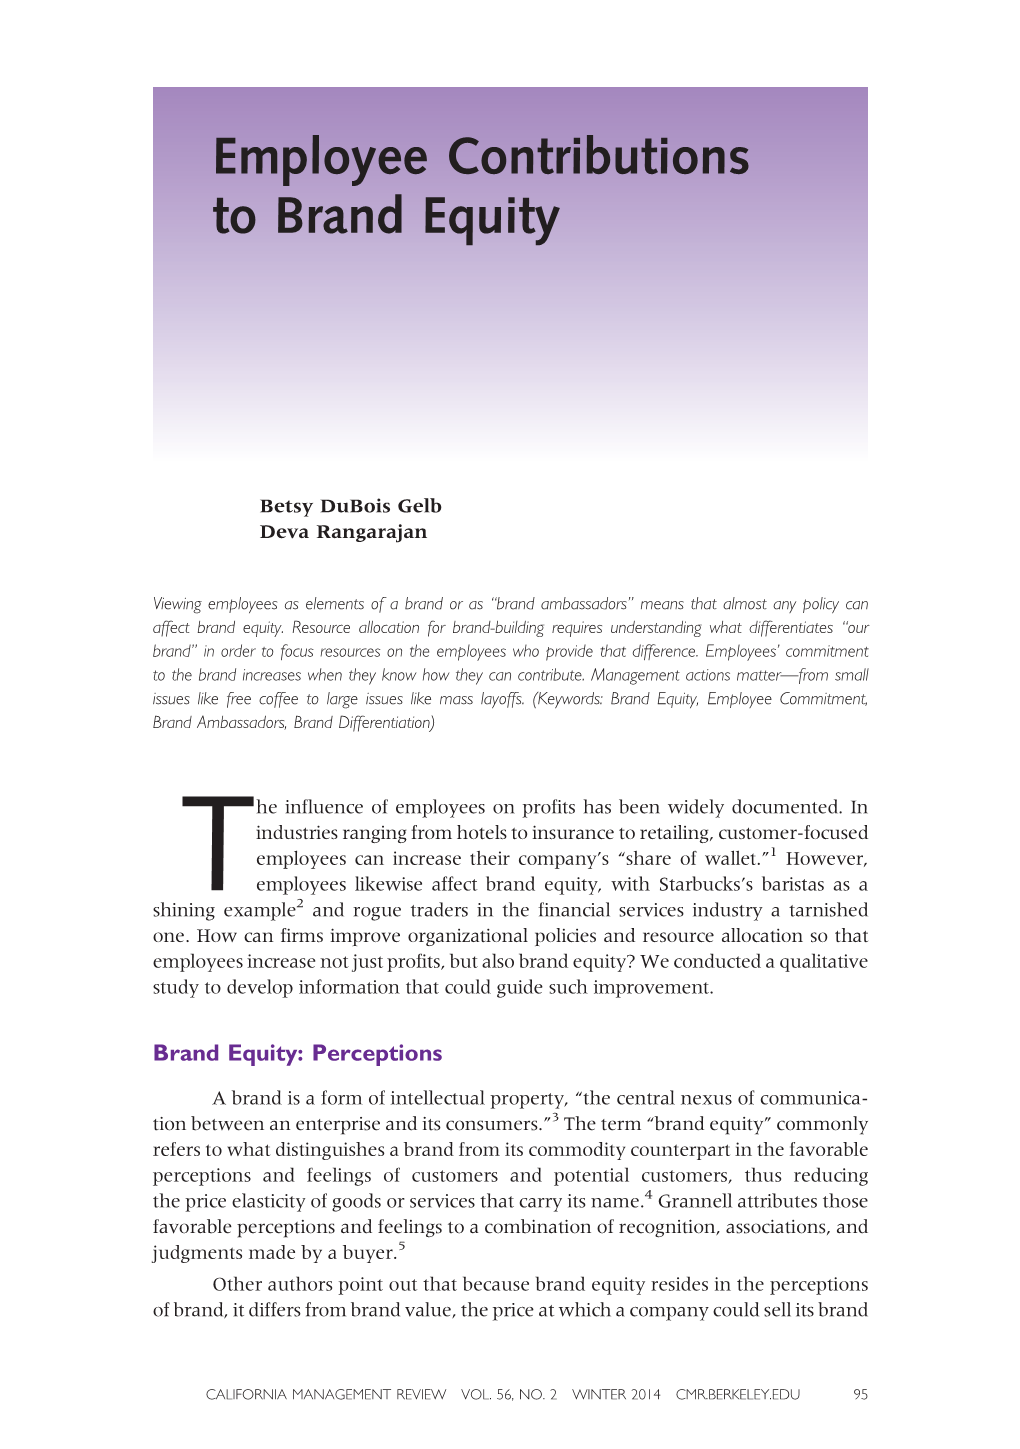 Employee Contributions to Brand Equity